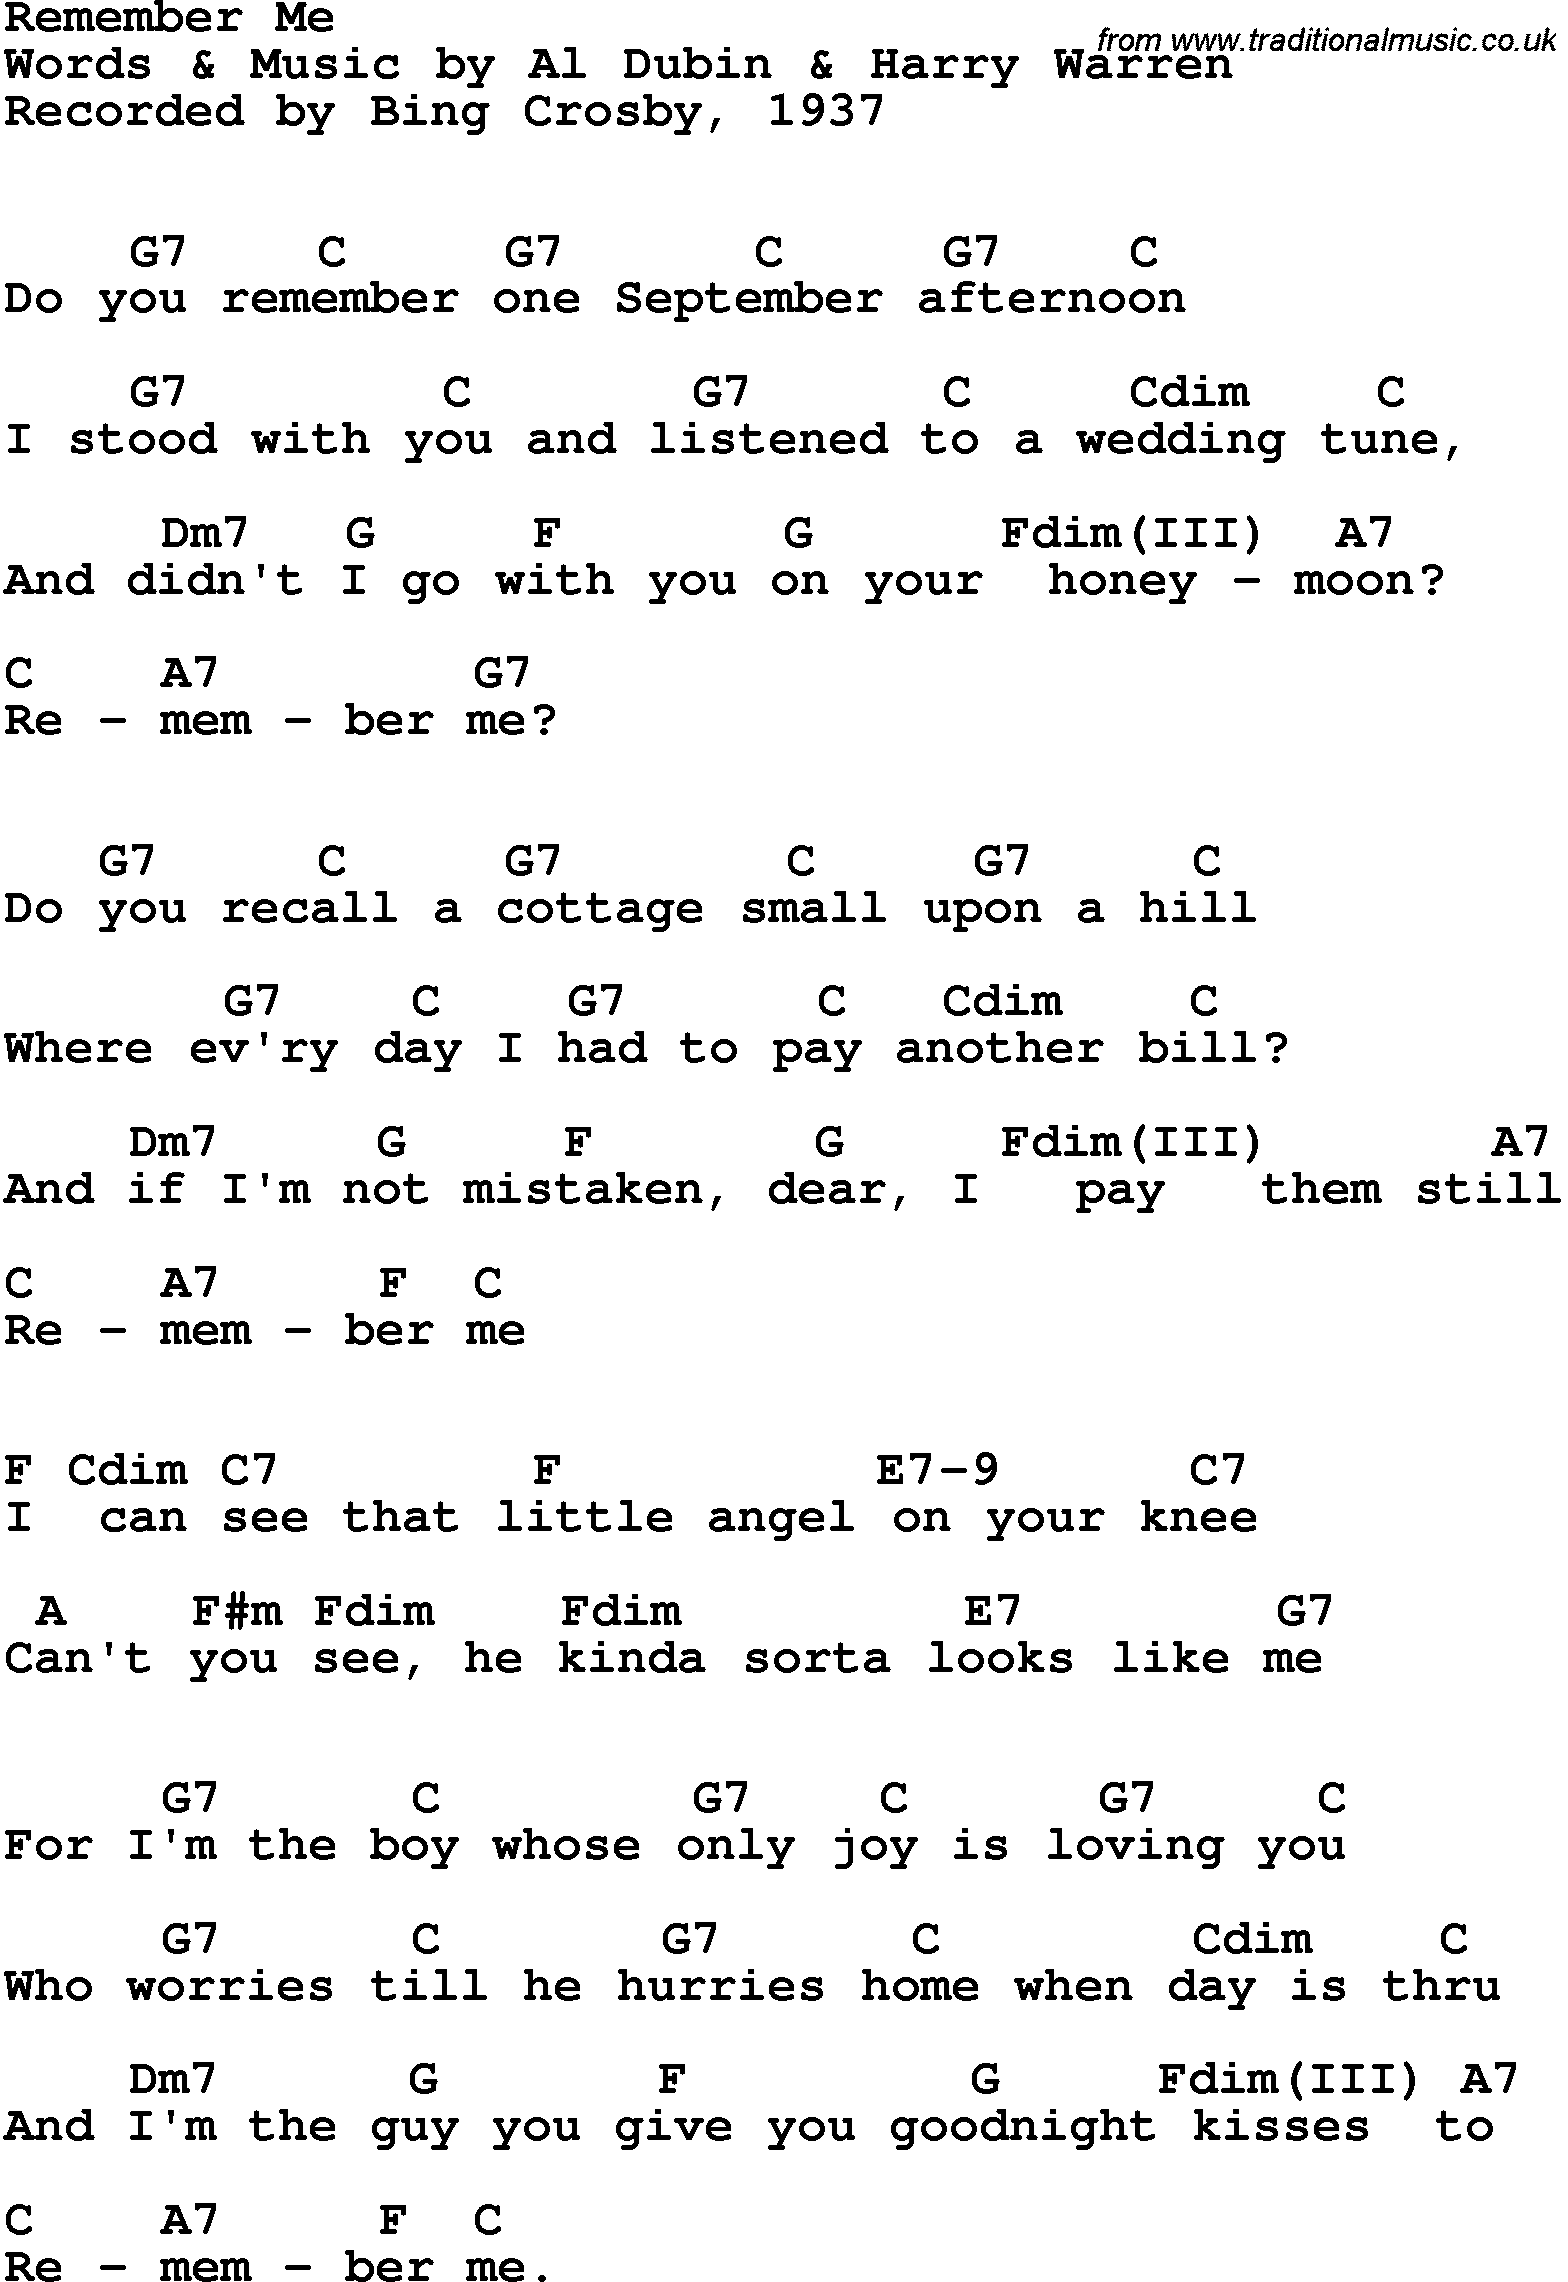 Song Lyrics with guitar chords for Remember Me - Bing Crosby, 1937